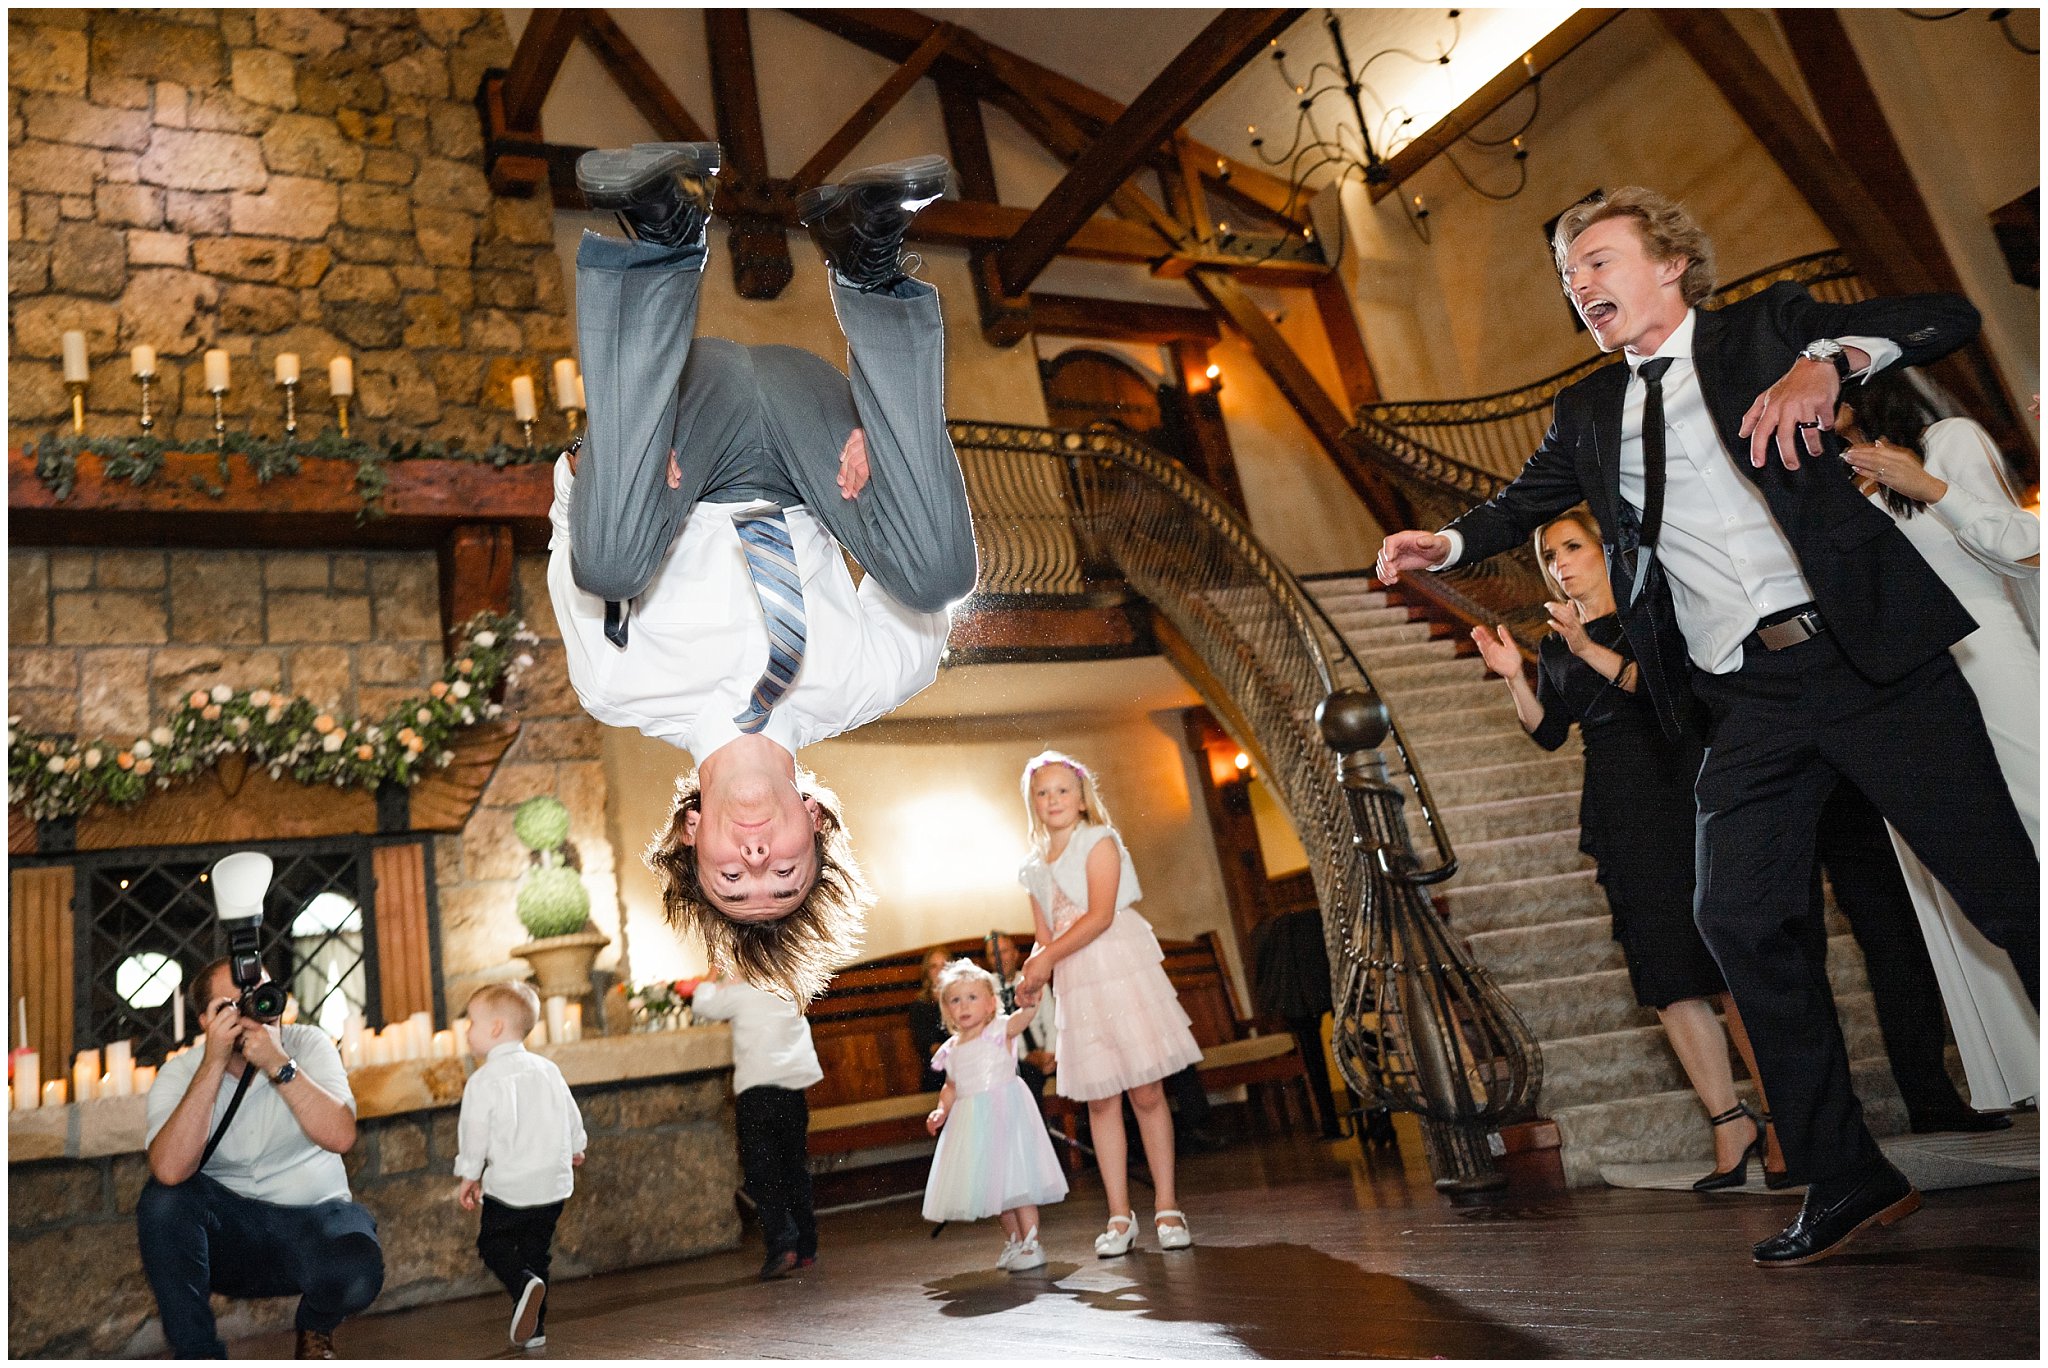 Dancing inside of castle venue | Draper Temple and Wadley Farms Summer Castle Wedding | Jessie and Dallin Photography